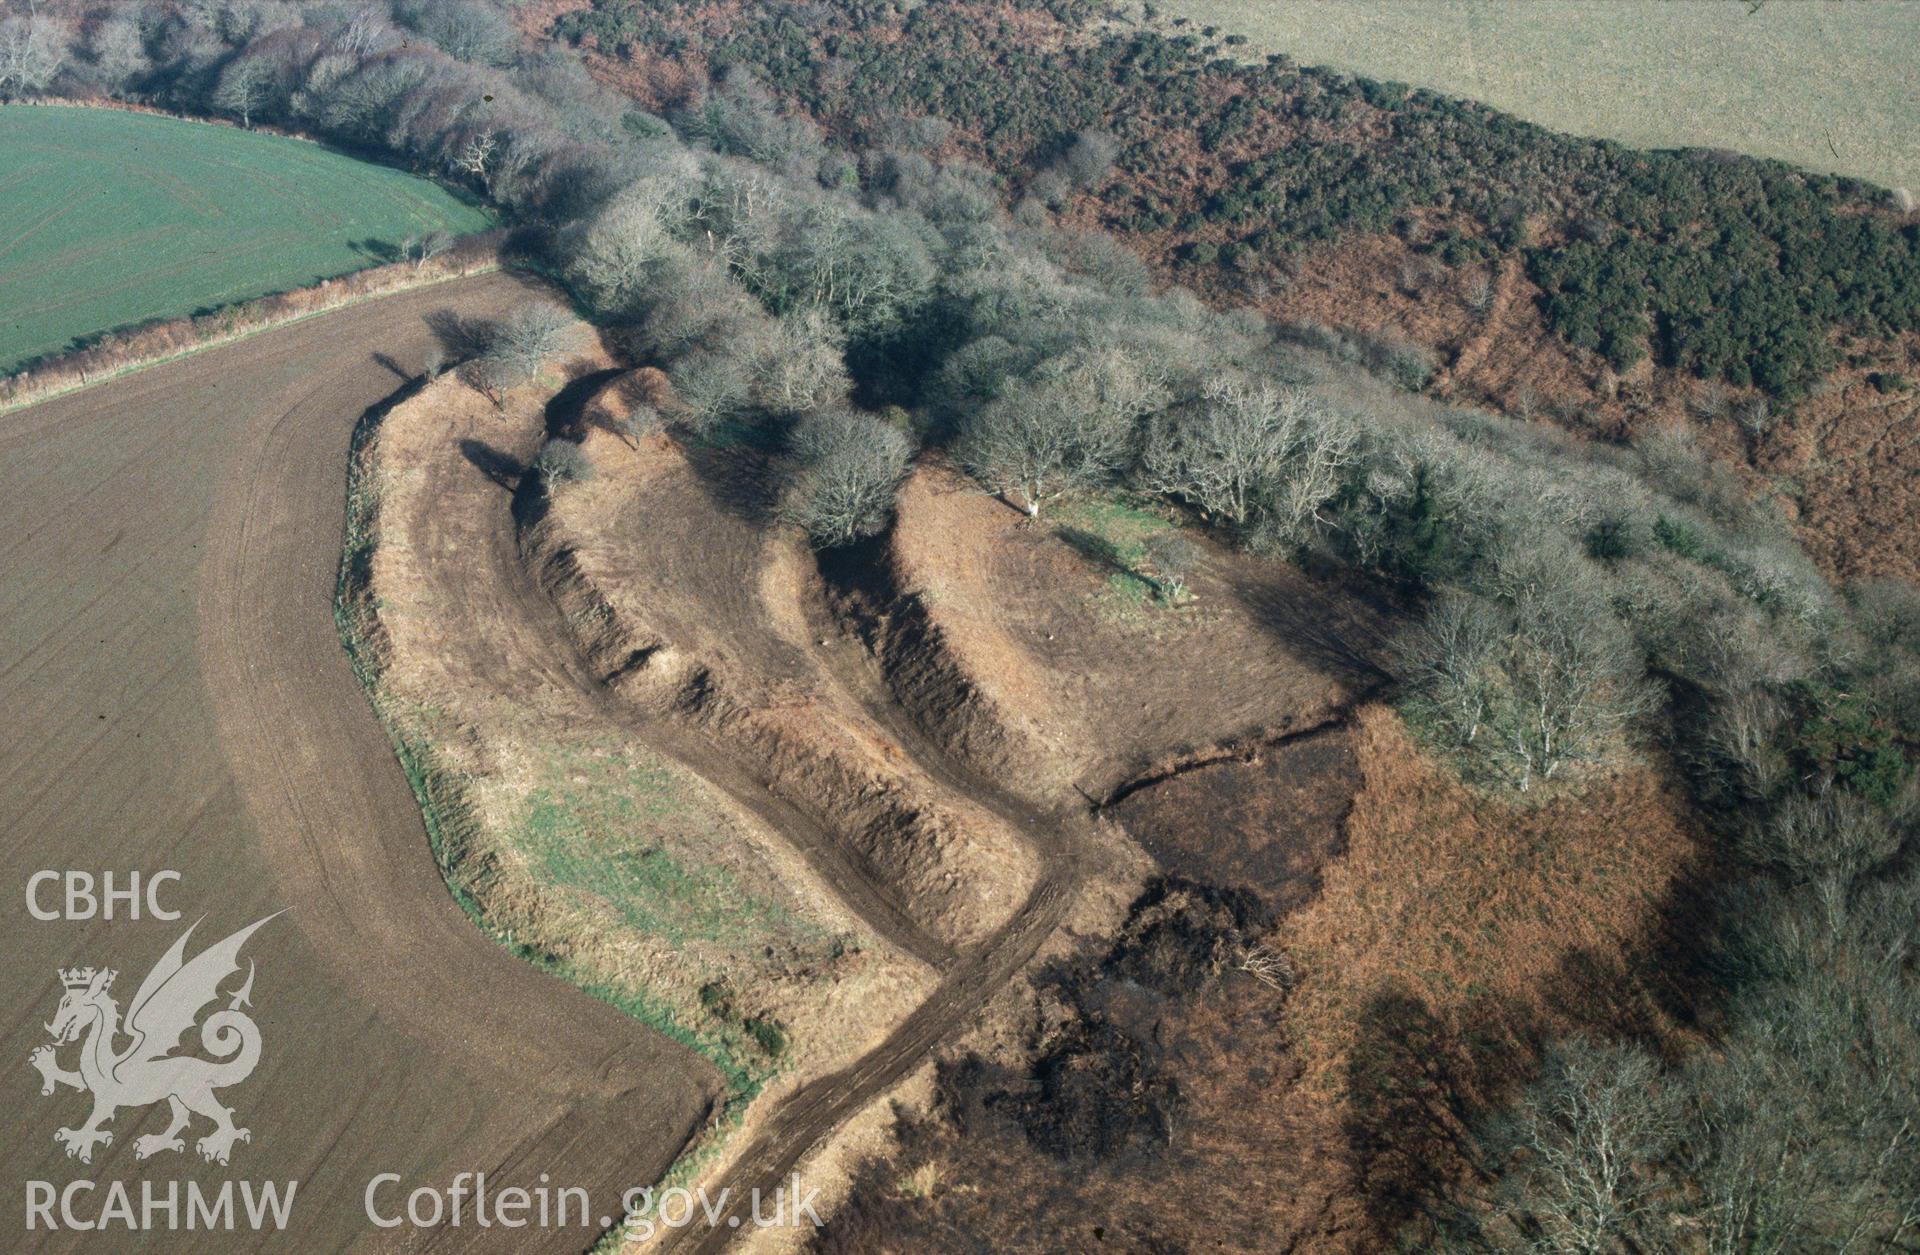 Slide of RCAHMW colour oblique aerial photograph of Brawdy Castle, taken by C.R. Musson, 14/1/1997.